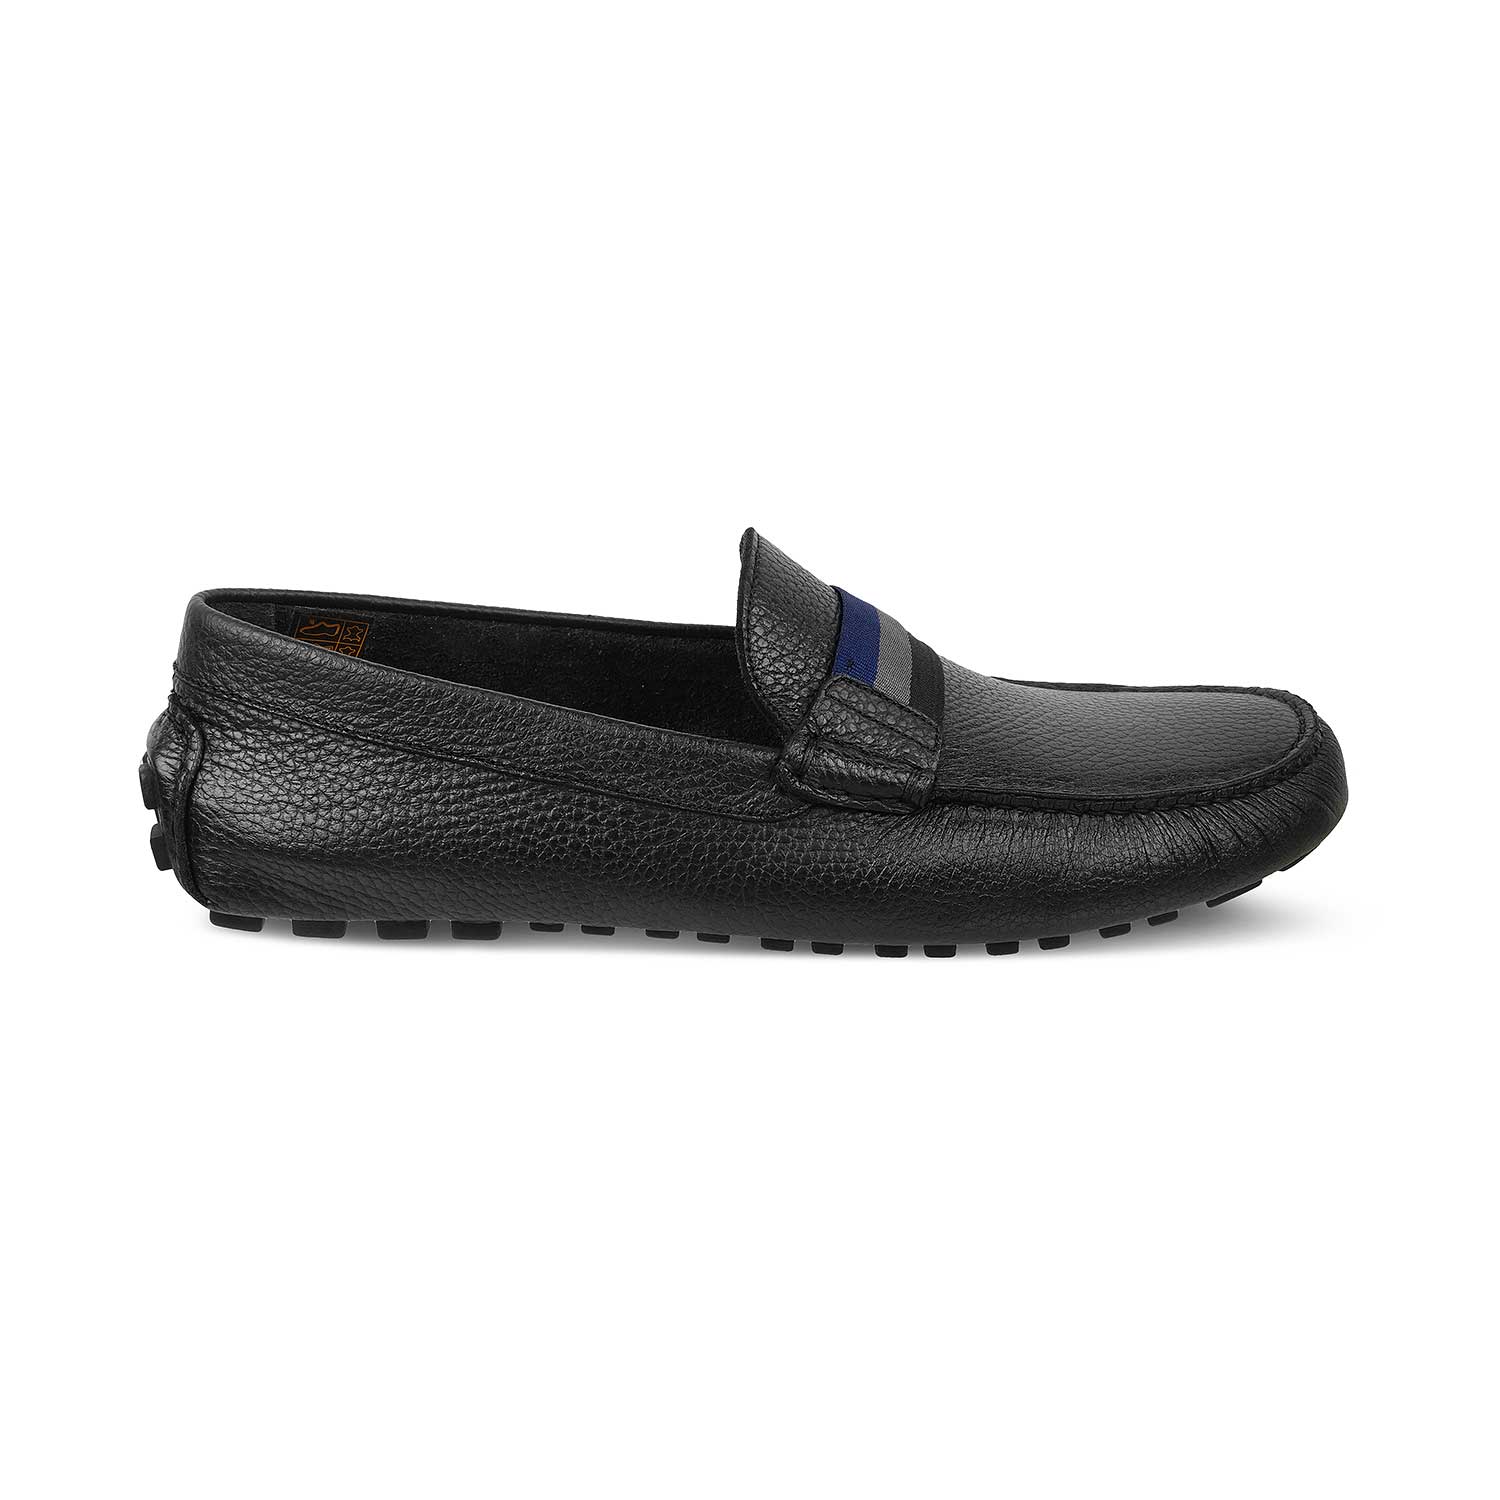 The Macario Black Men's Handcrafted Leather Driving Loafers Tresmode